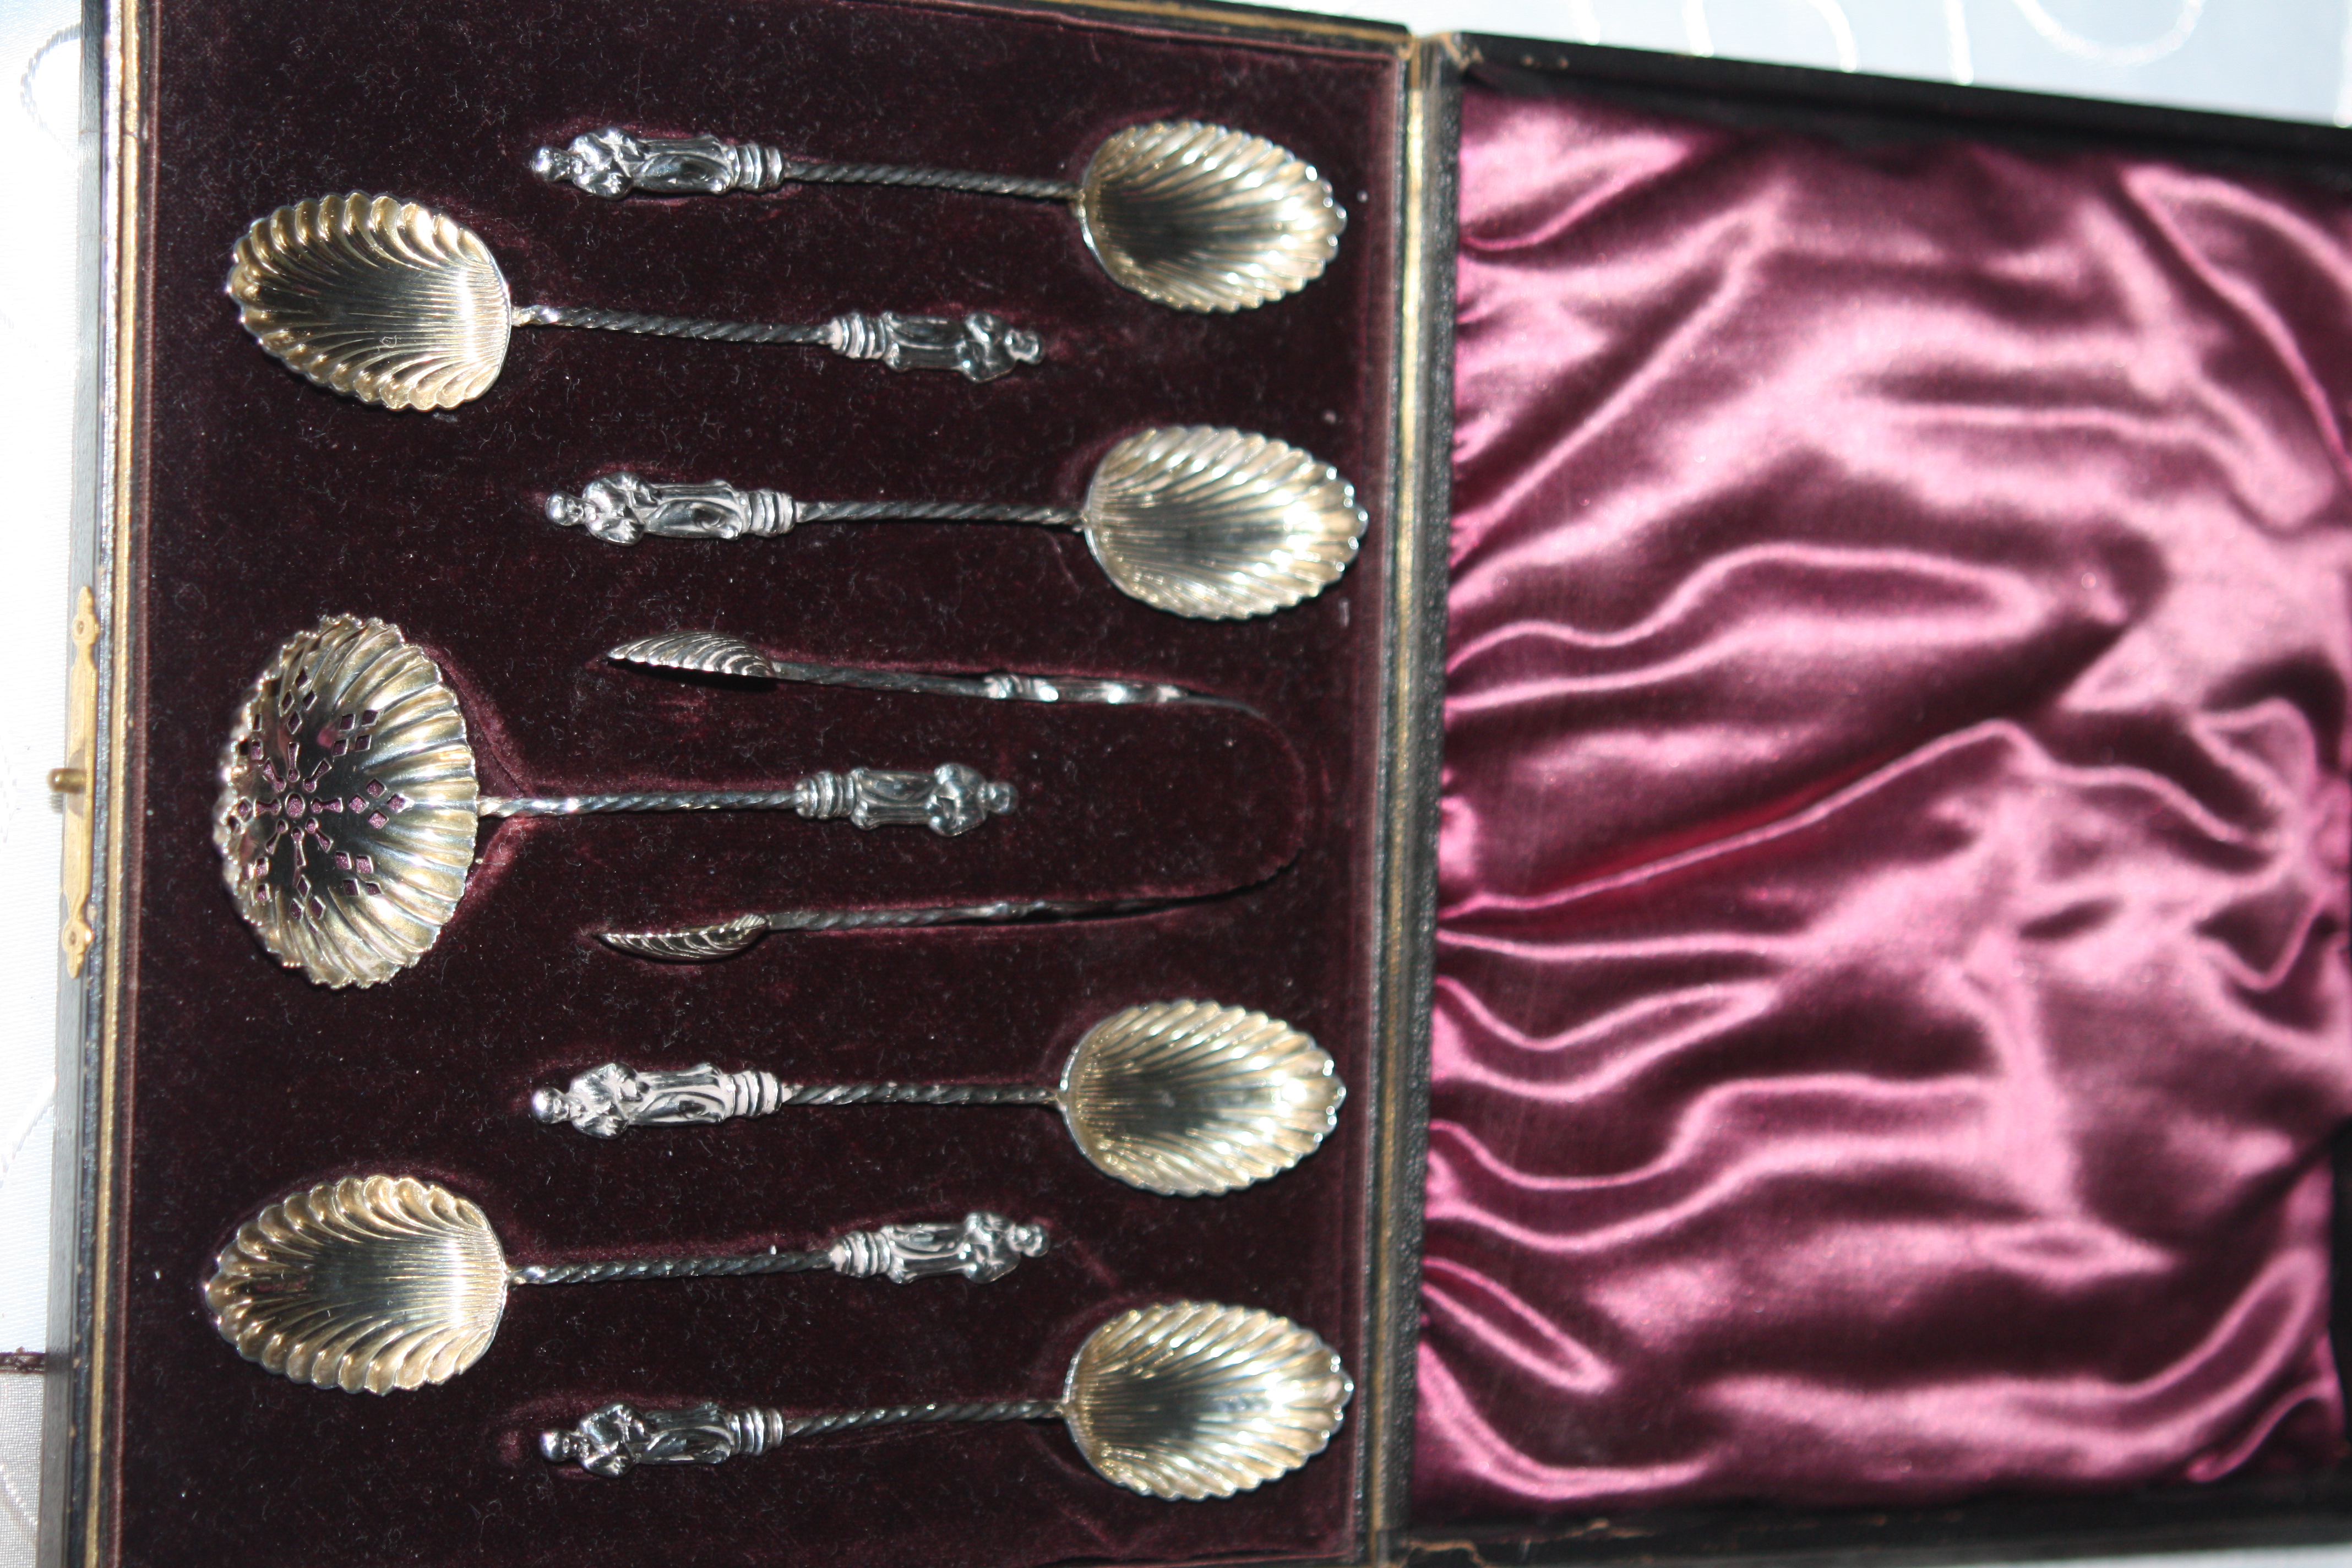 6 solid silver Apostle Spoons with cream spoon and candy tong